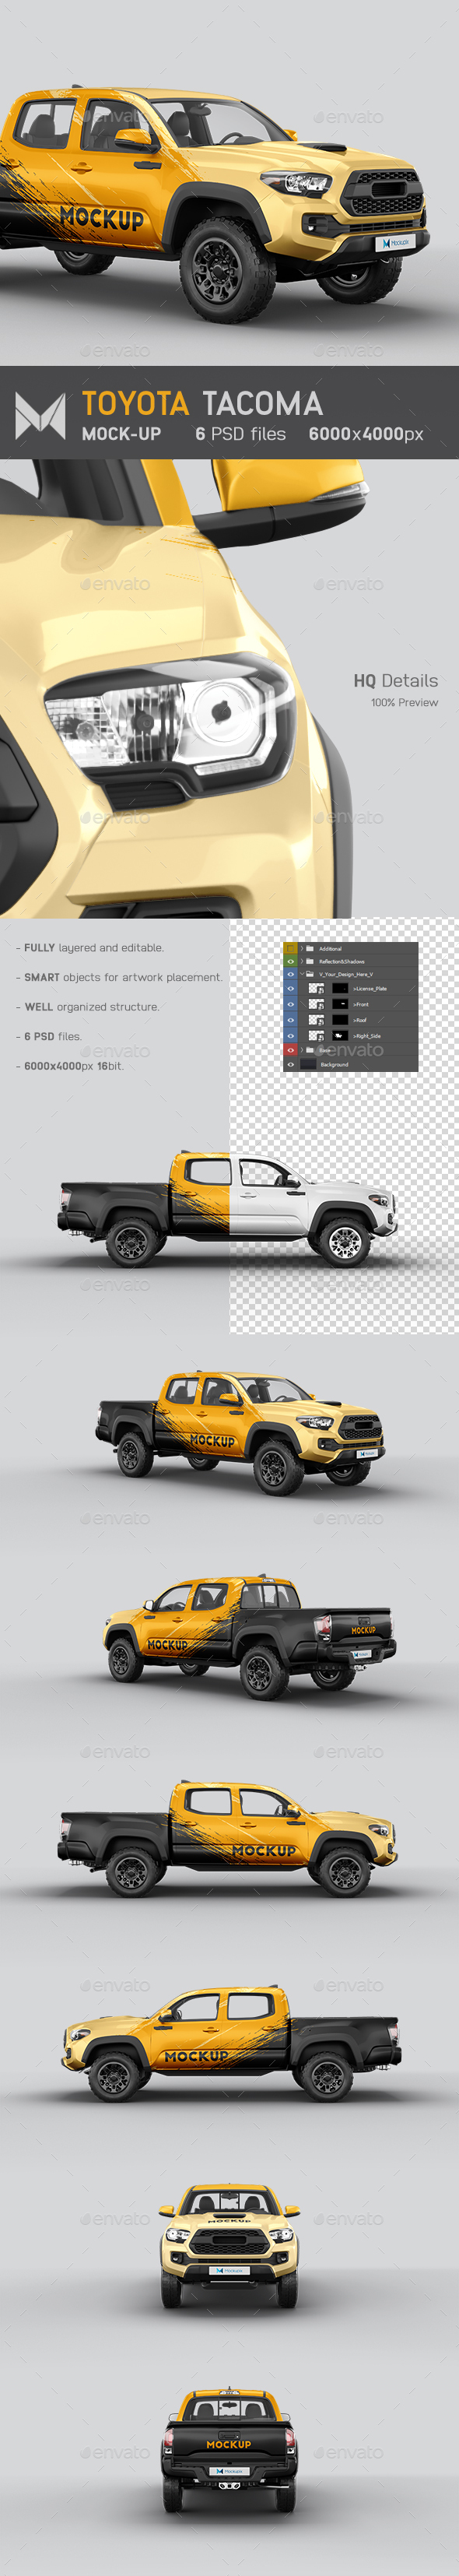 Download Toyota Graphics Designs Templates From Graphicriver